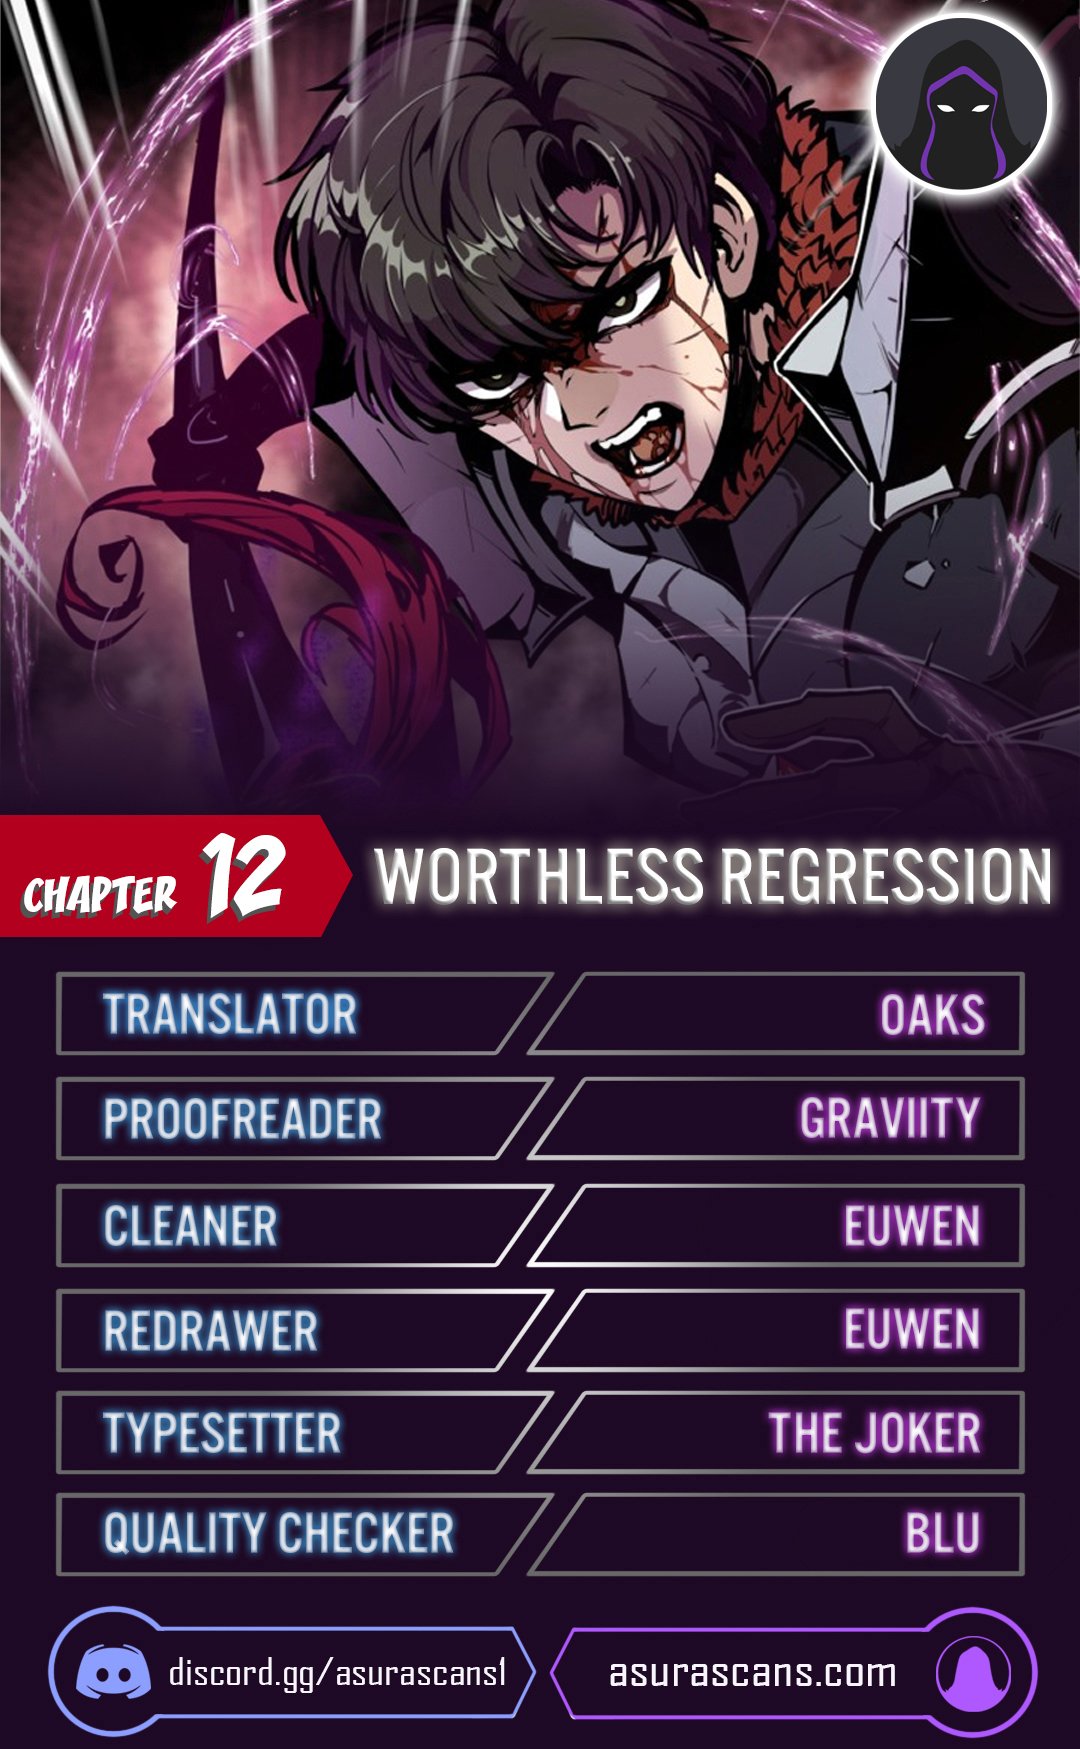 Worthless Regression - Chapter 20450 - Image 1